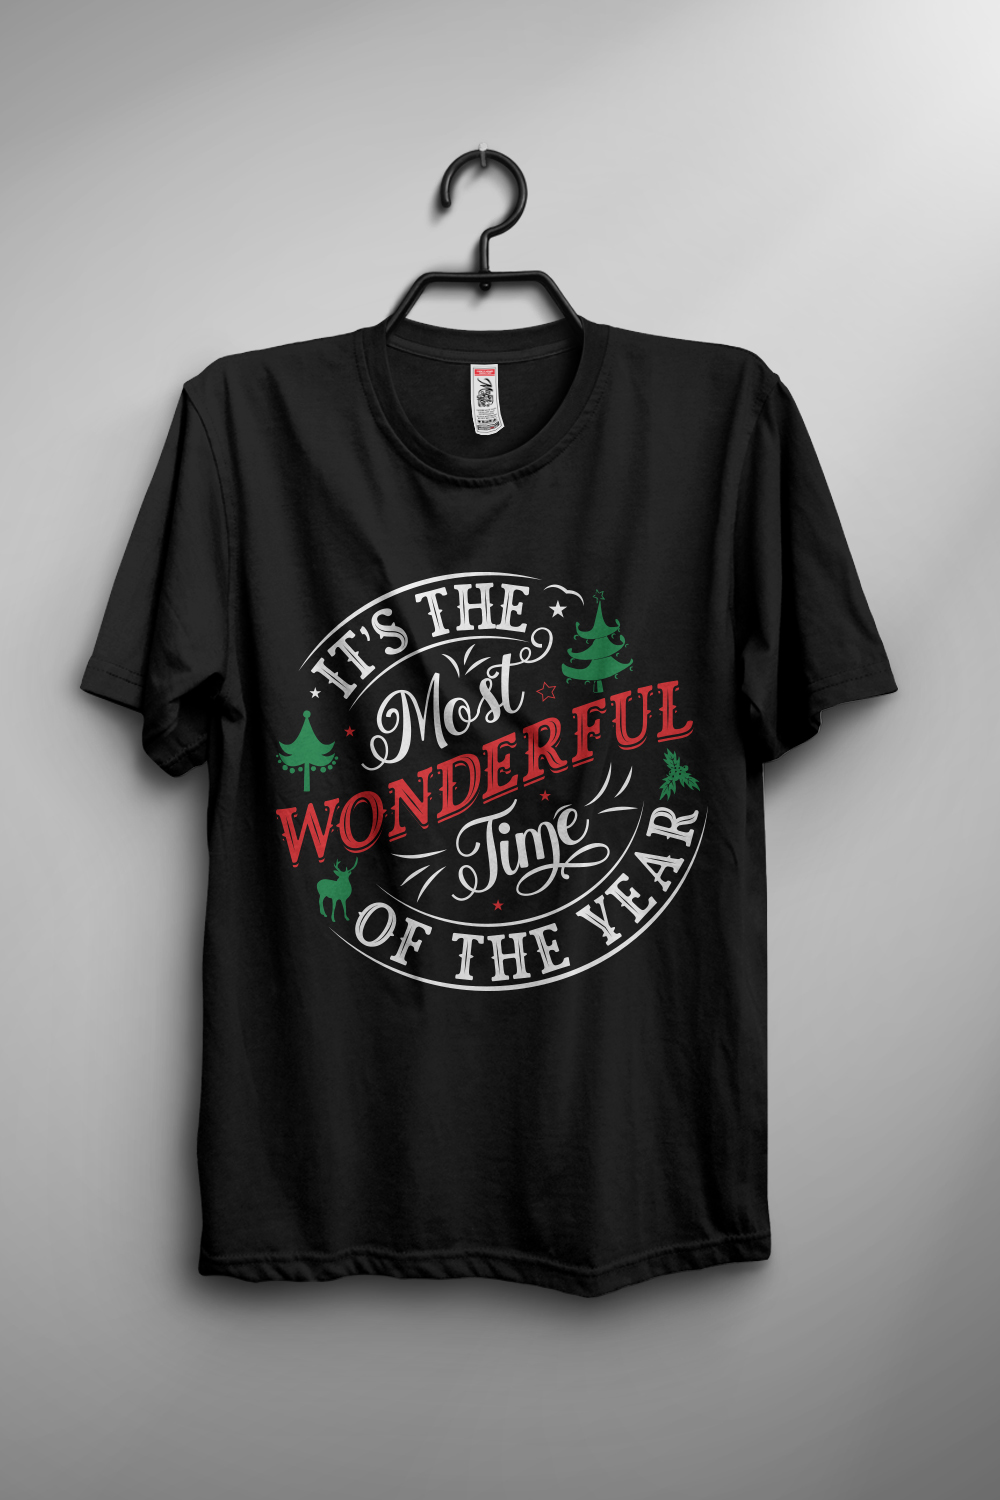 It's the most wonderful time of the year T-shirt design pinterest preview image.